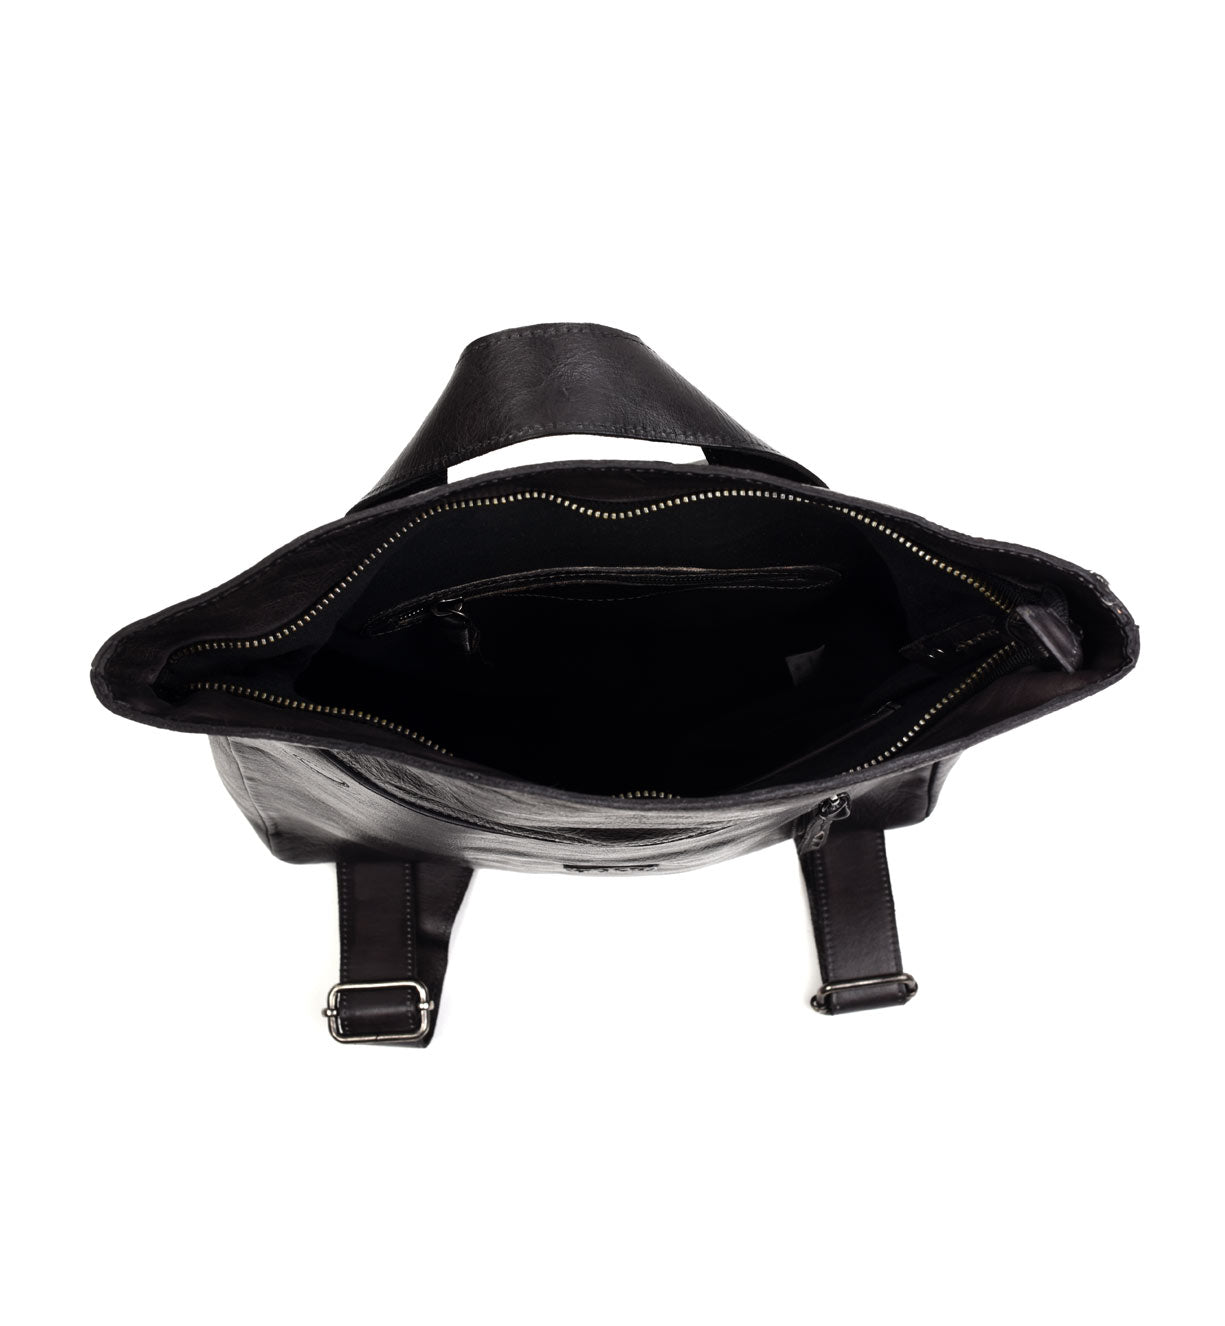 Inside the black leather Howie bag on a white background by Bed Stu.